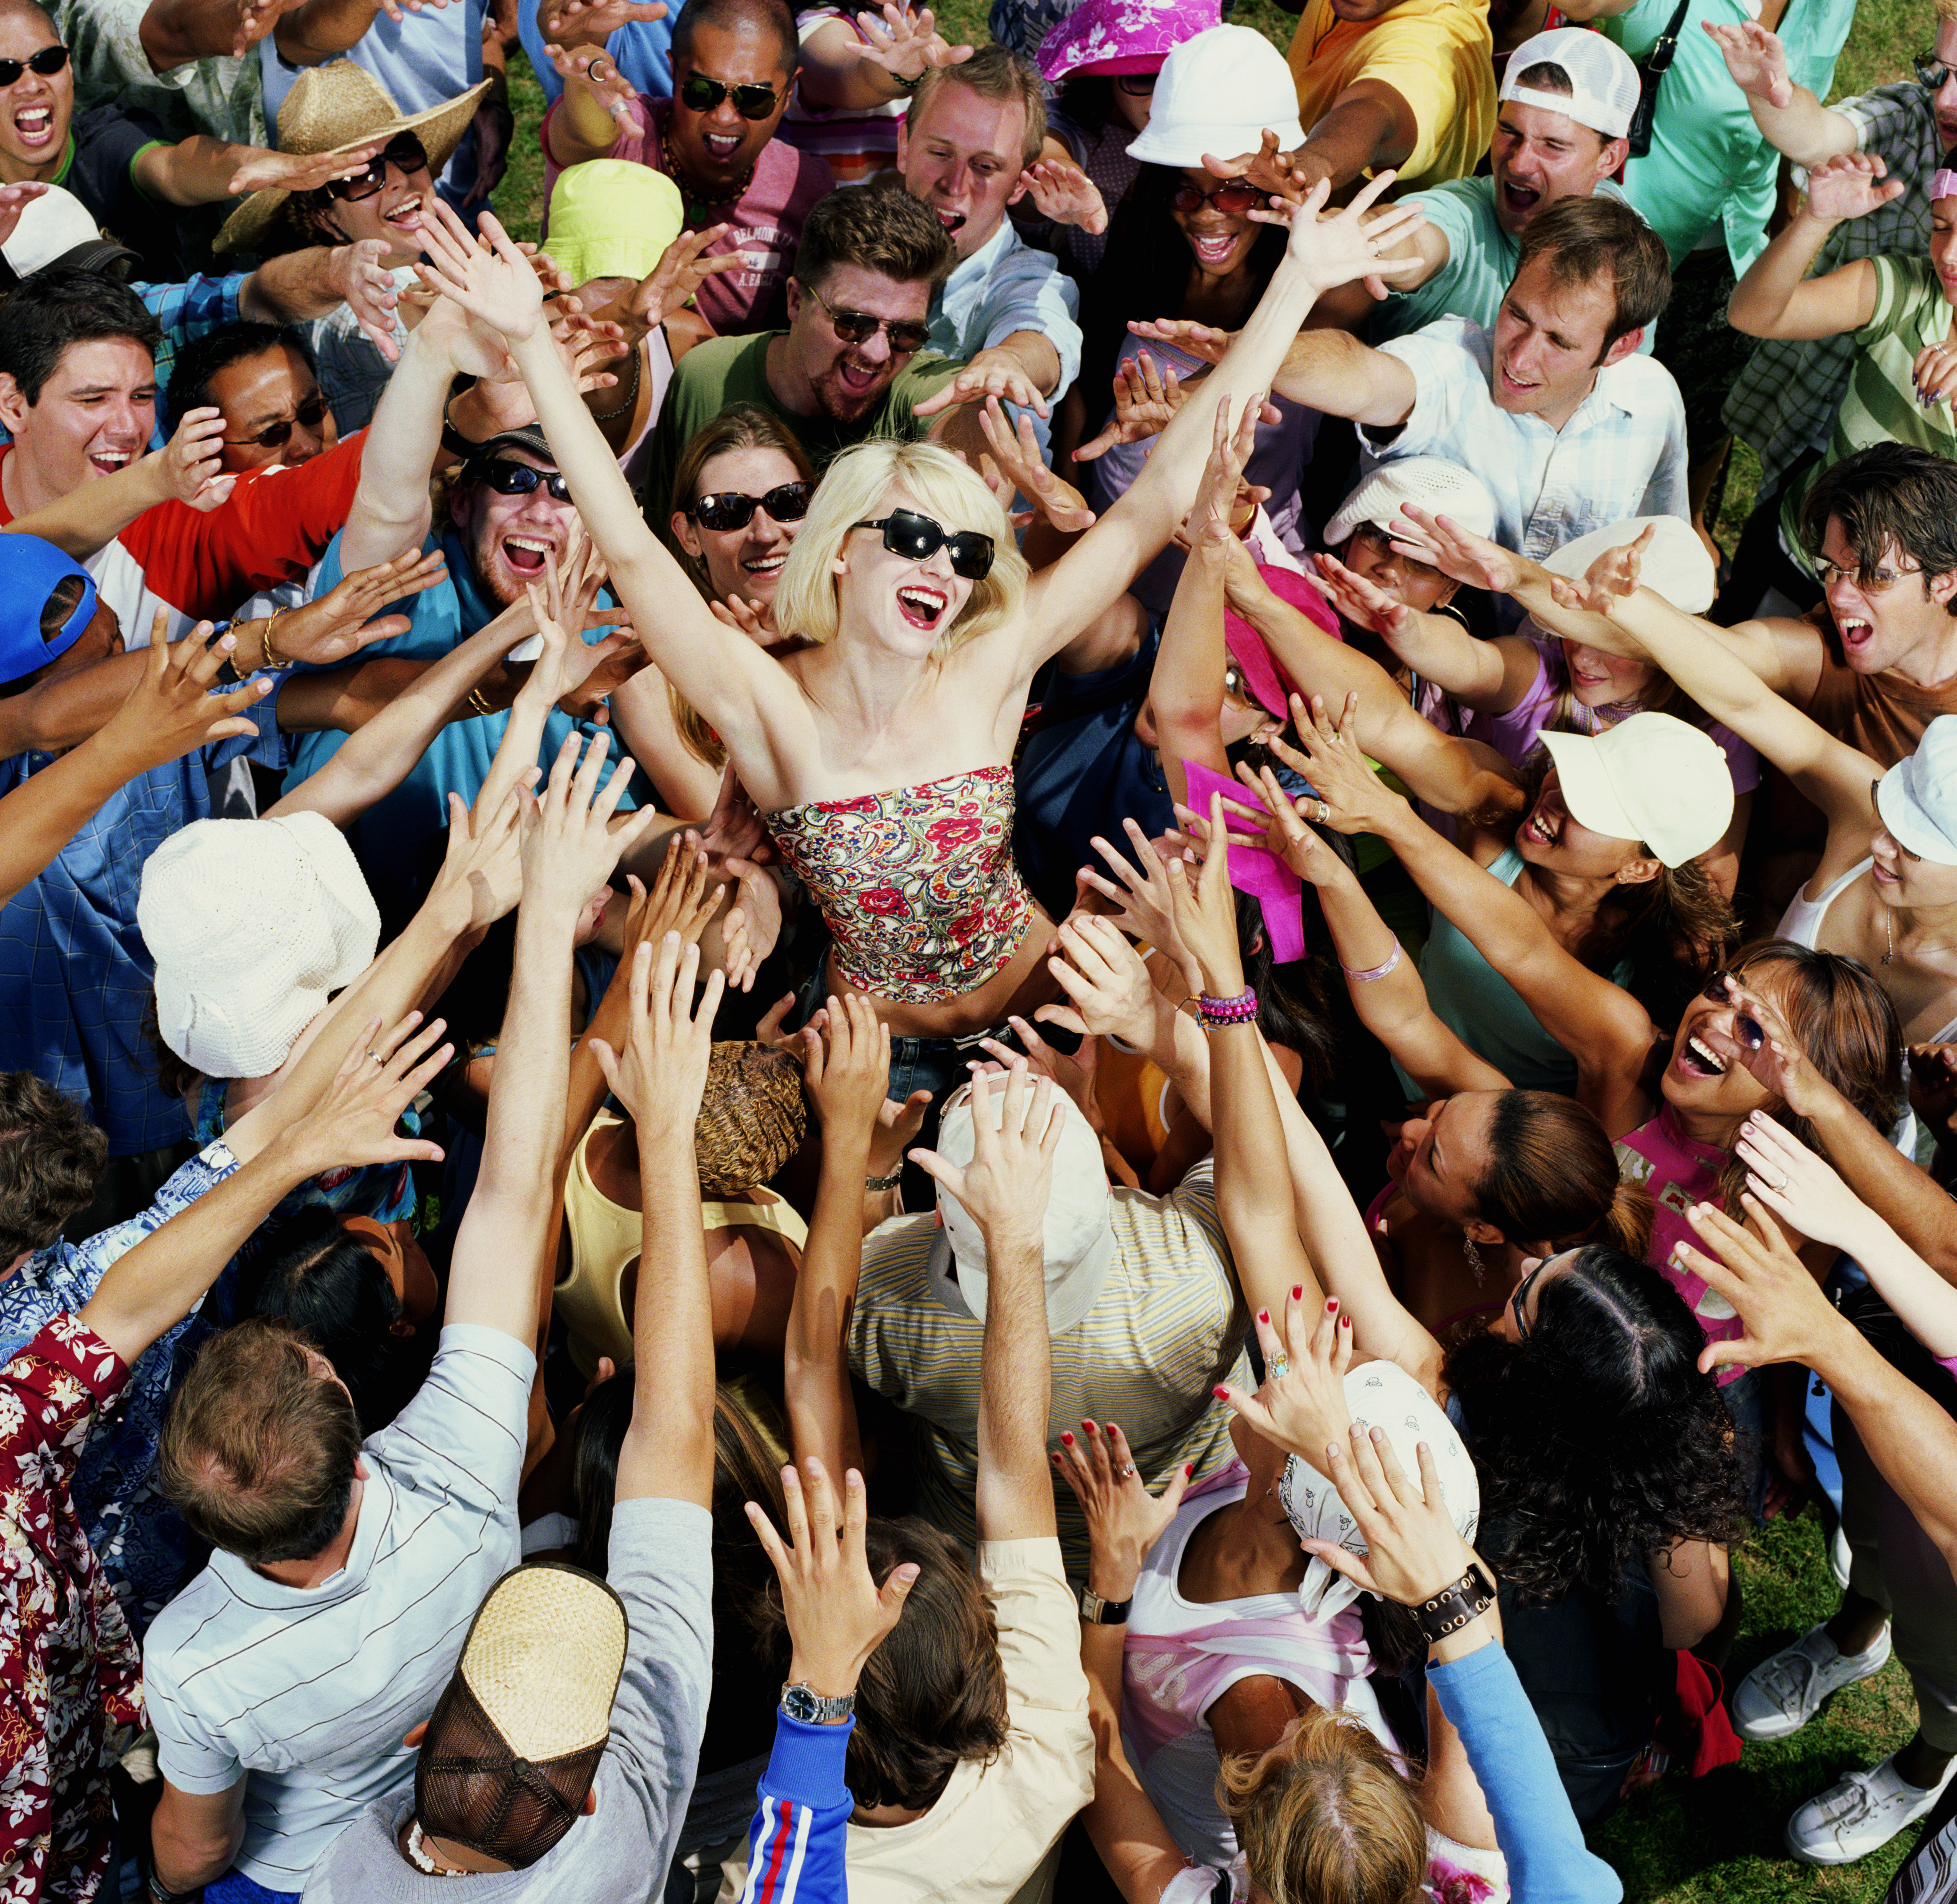 A woman smiling as she is the centre of attention in a crowd. | Source: Getty Images